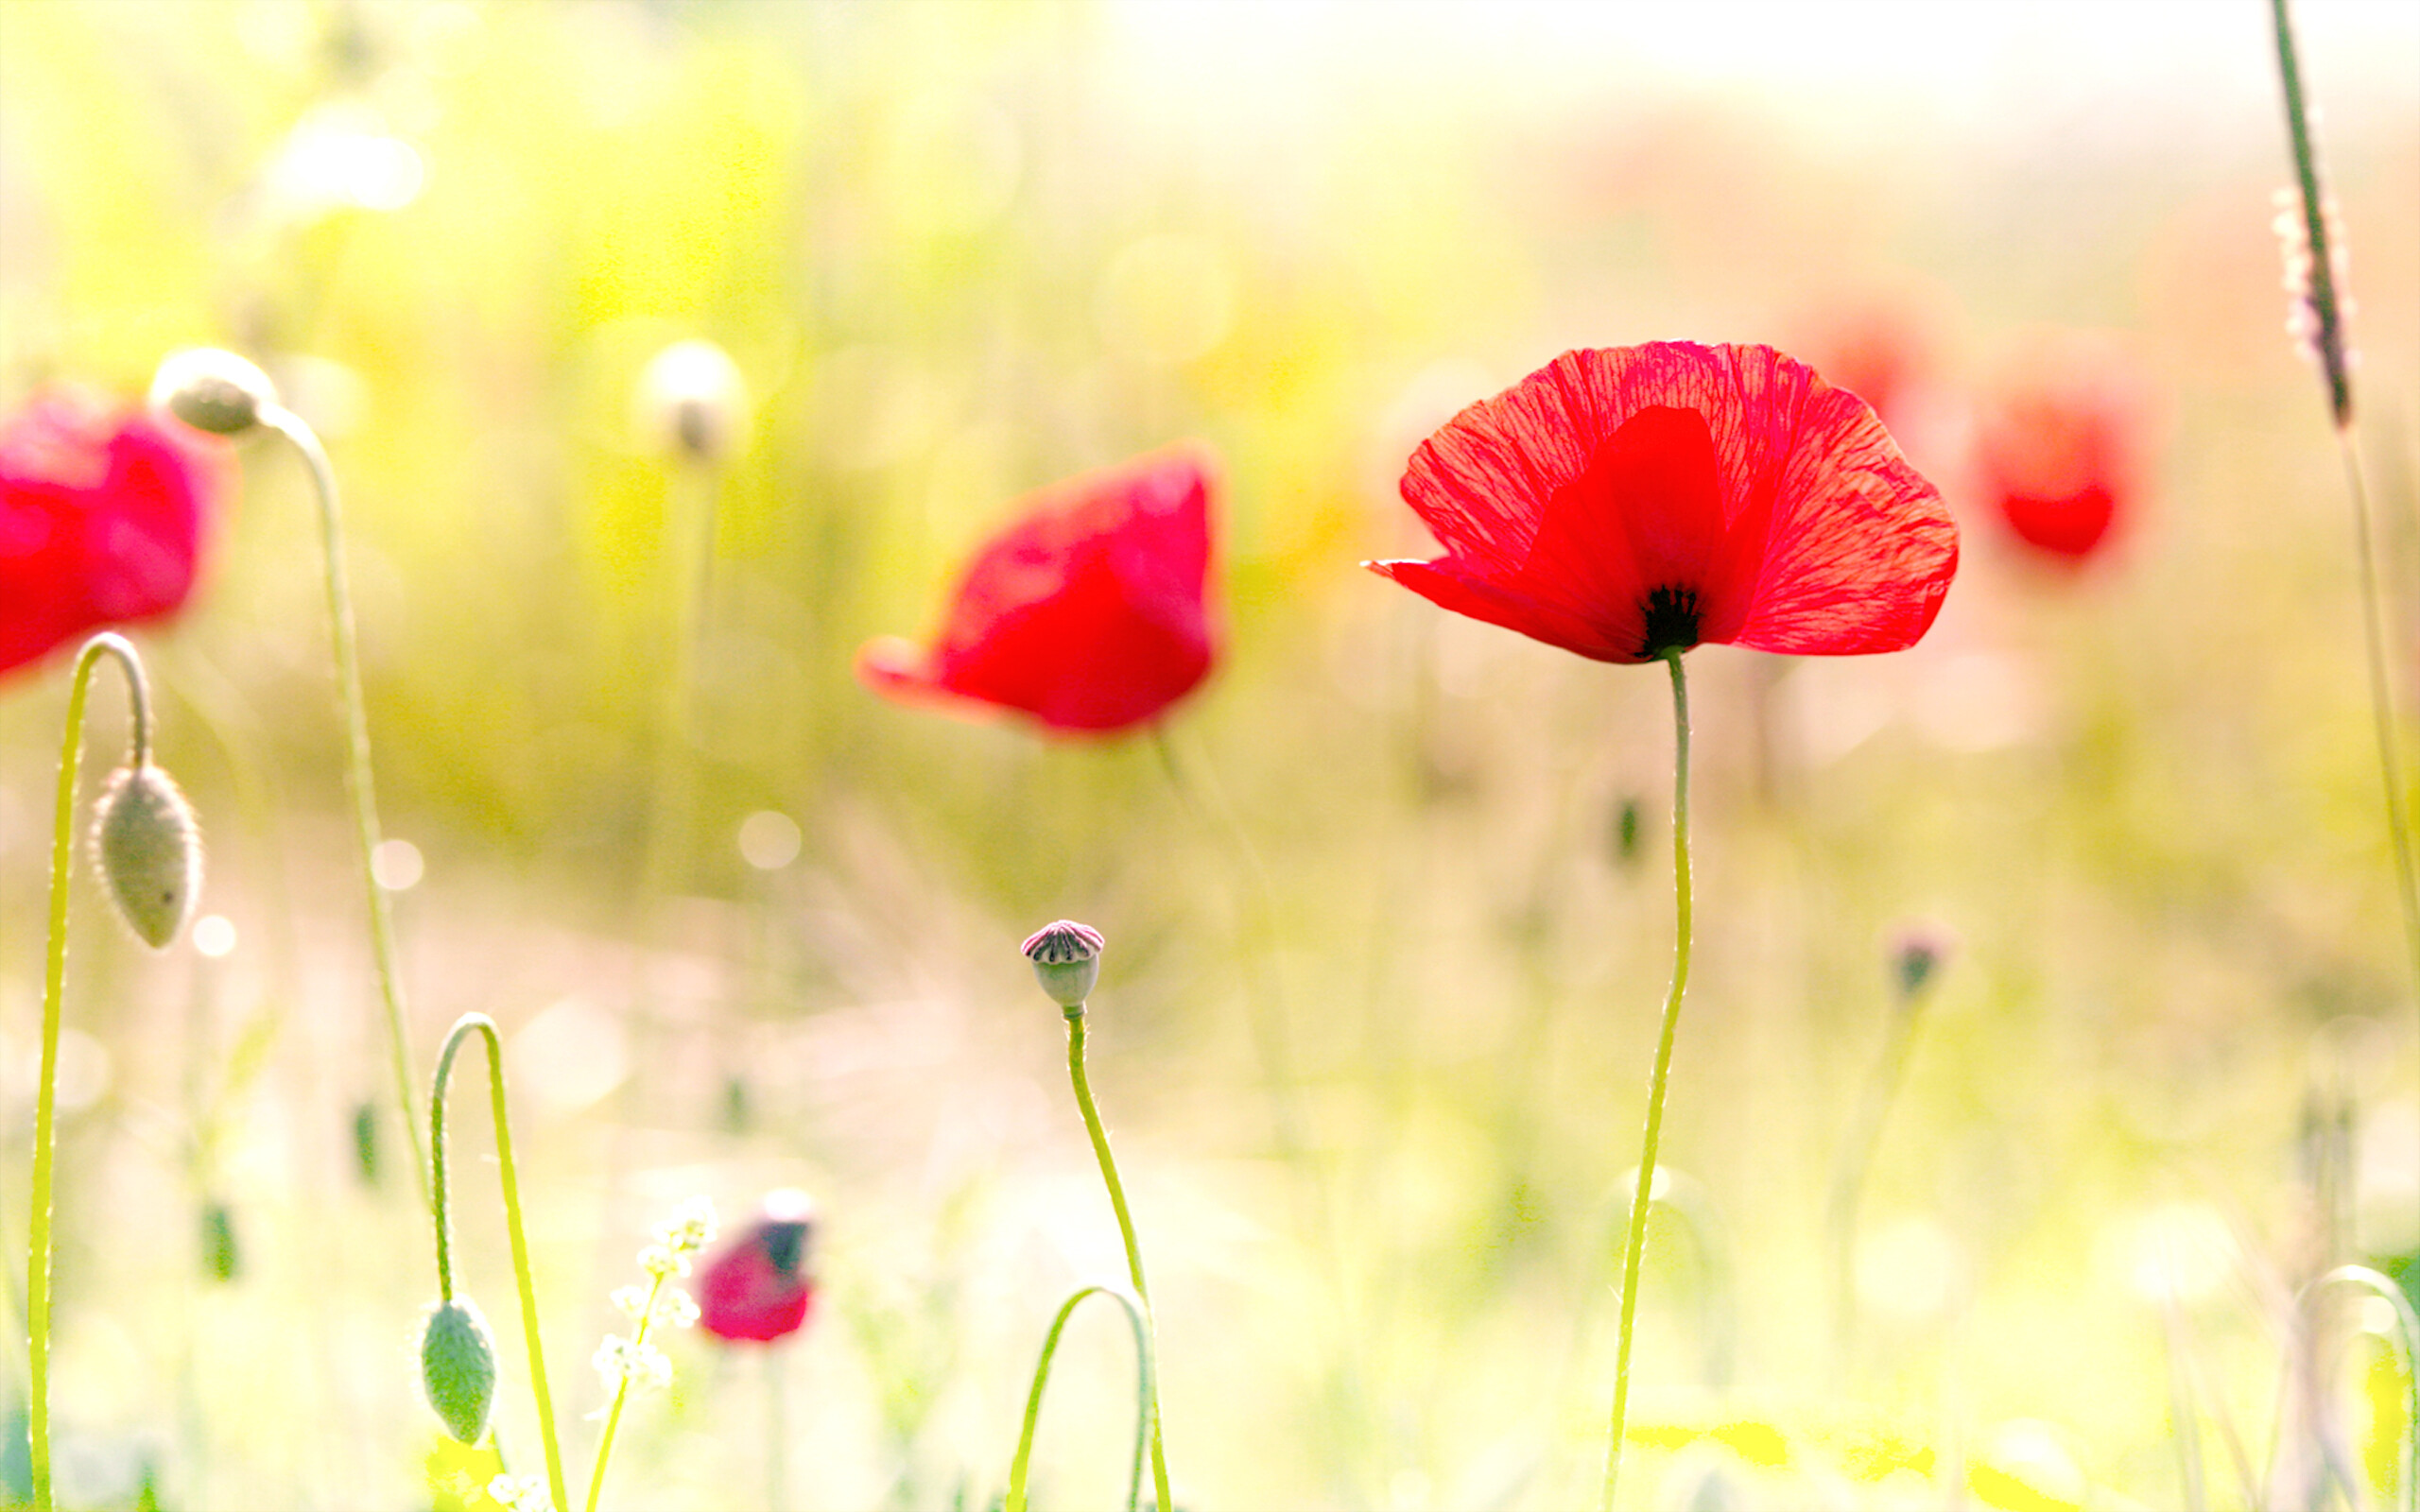 Poppy Flower: Ancient Greeks regarded poppies as a source of fertility, health, and strength. 2560x1600 HD Wallpaper.